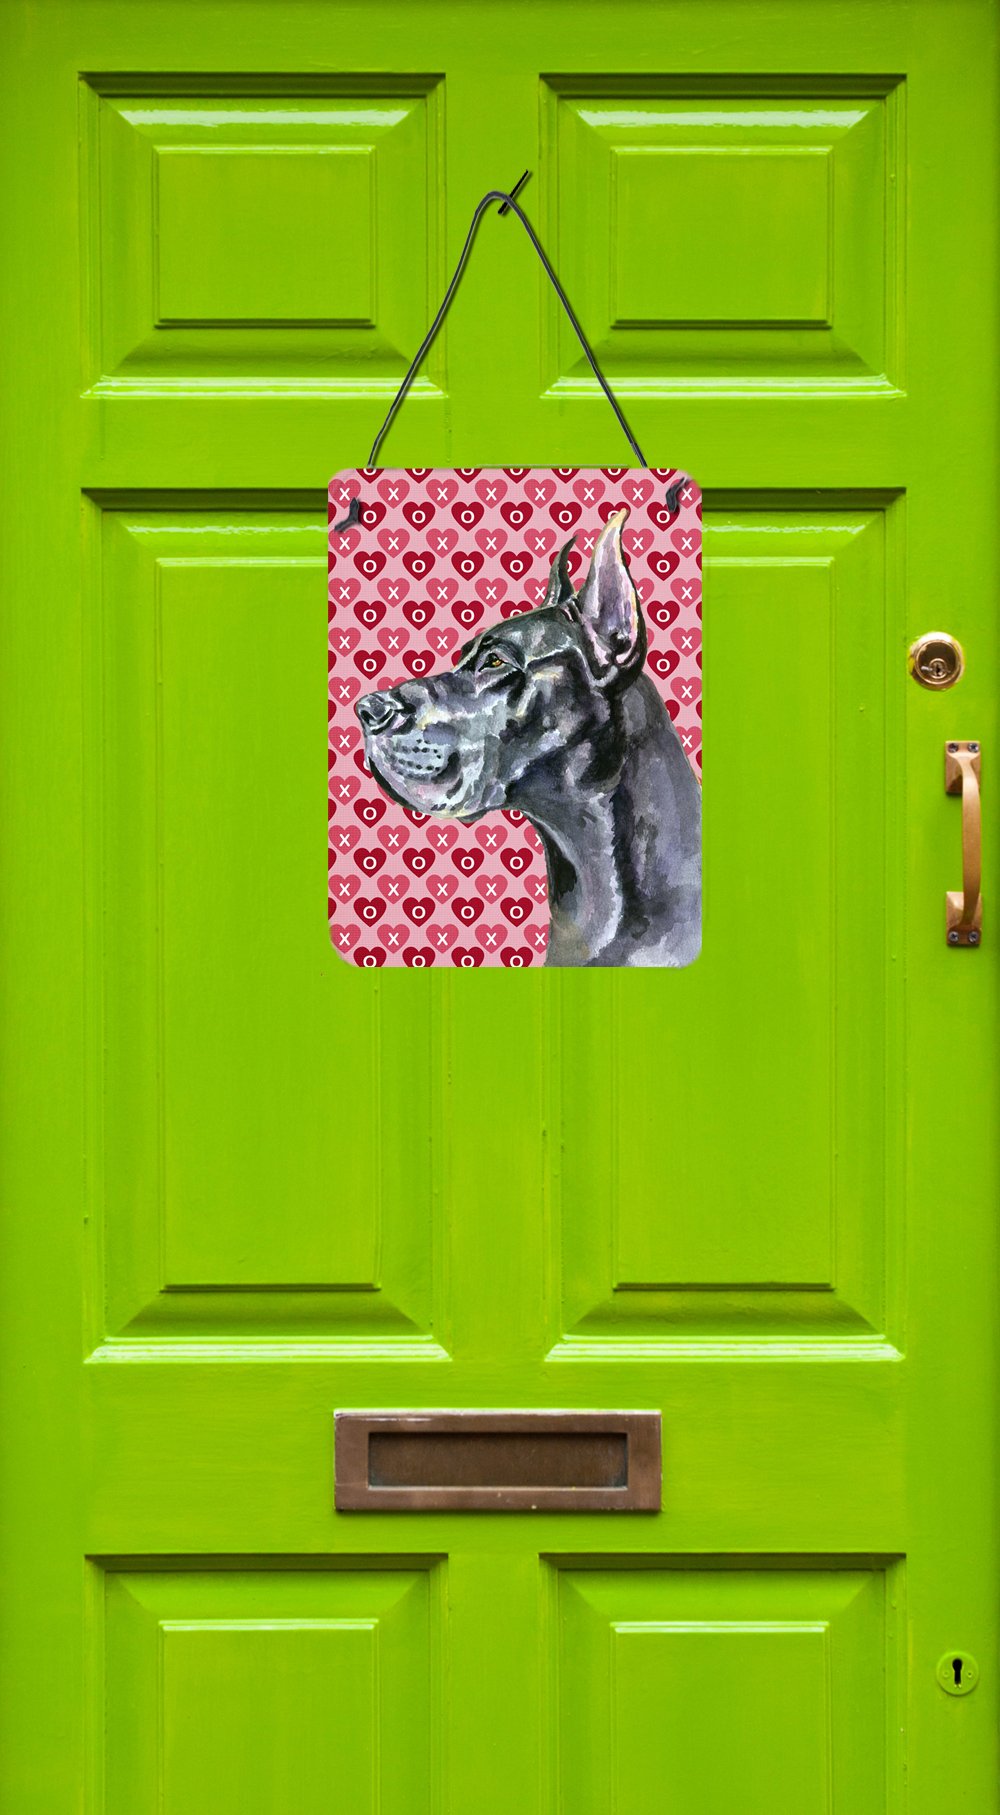 Black Great Dane Hearts Love and Valentine's Day Wall or Door Hanging Prints LH9564DS1216 by Caroline's Treasures